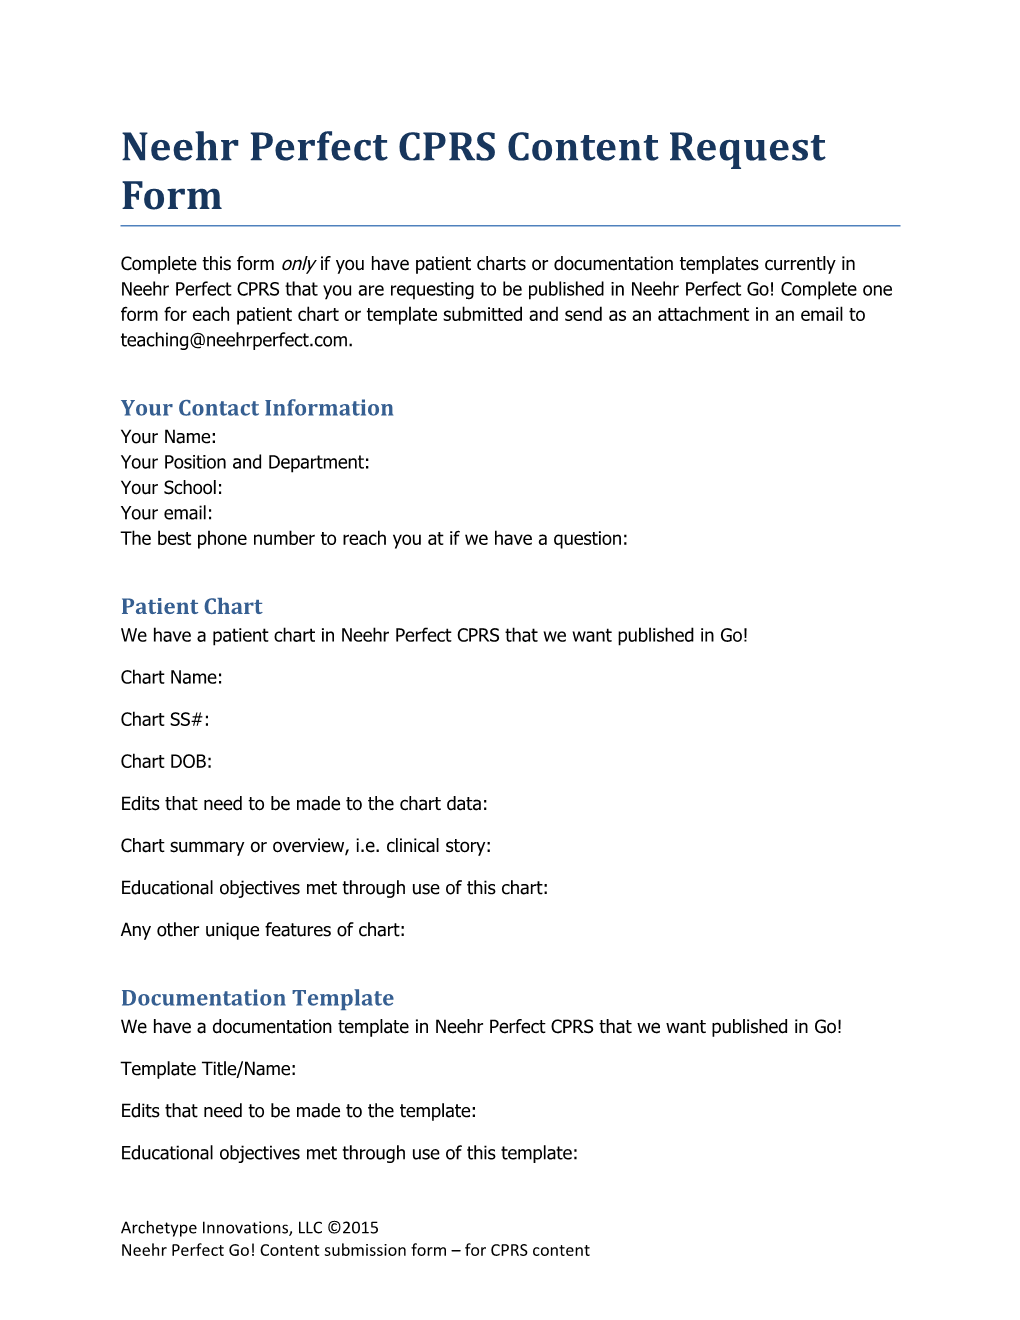 Neehr Perfect CPRS Content Request Form